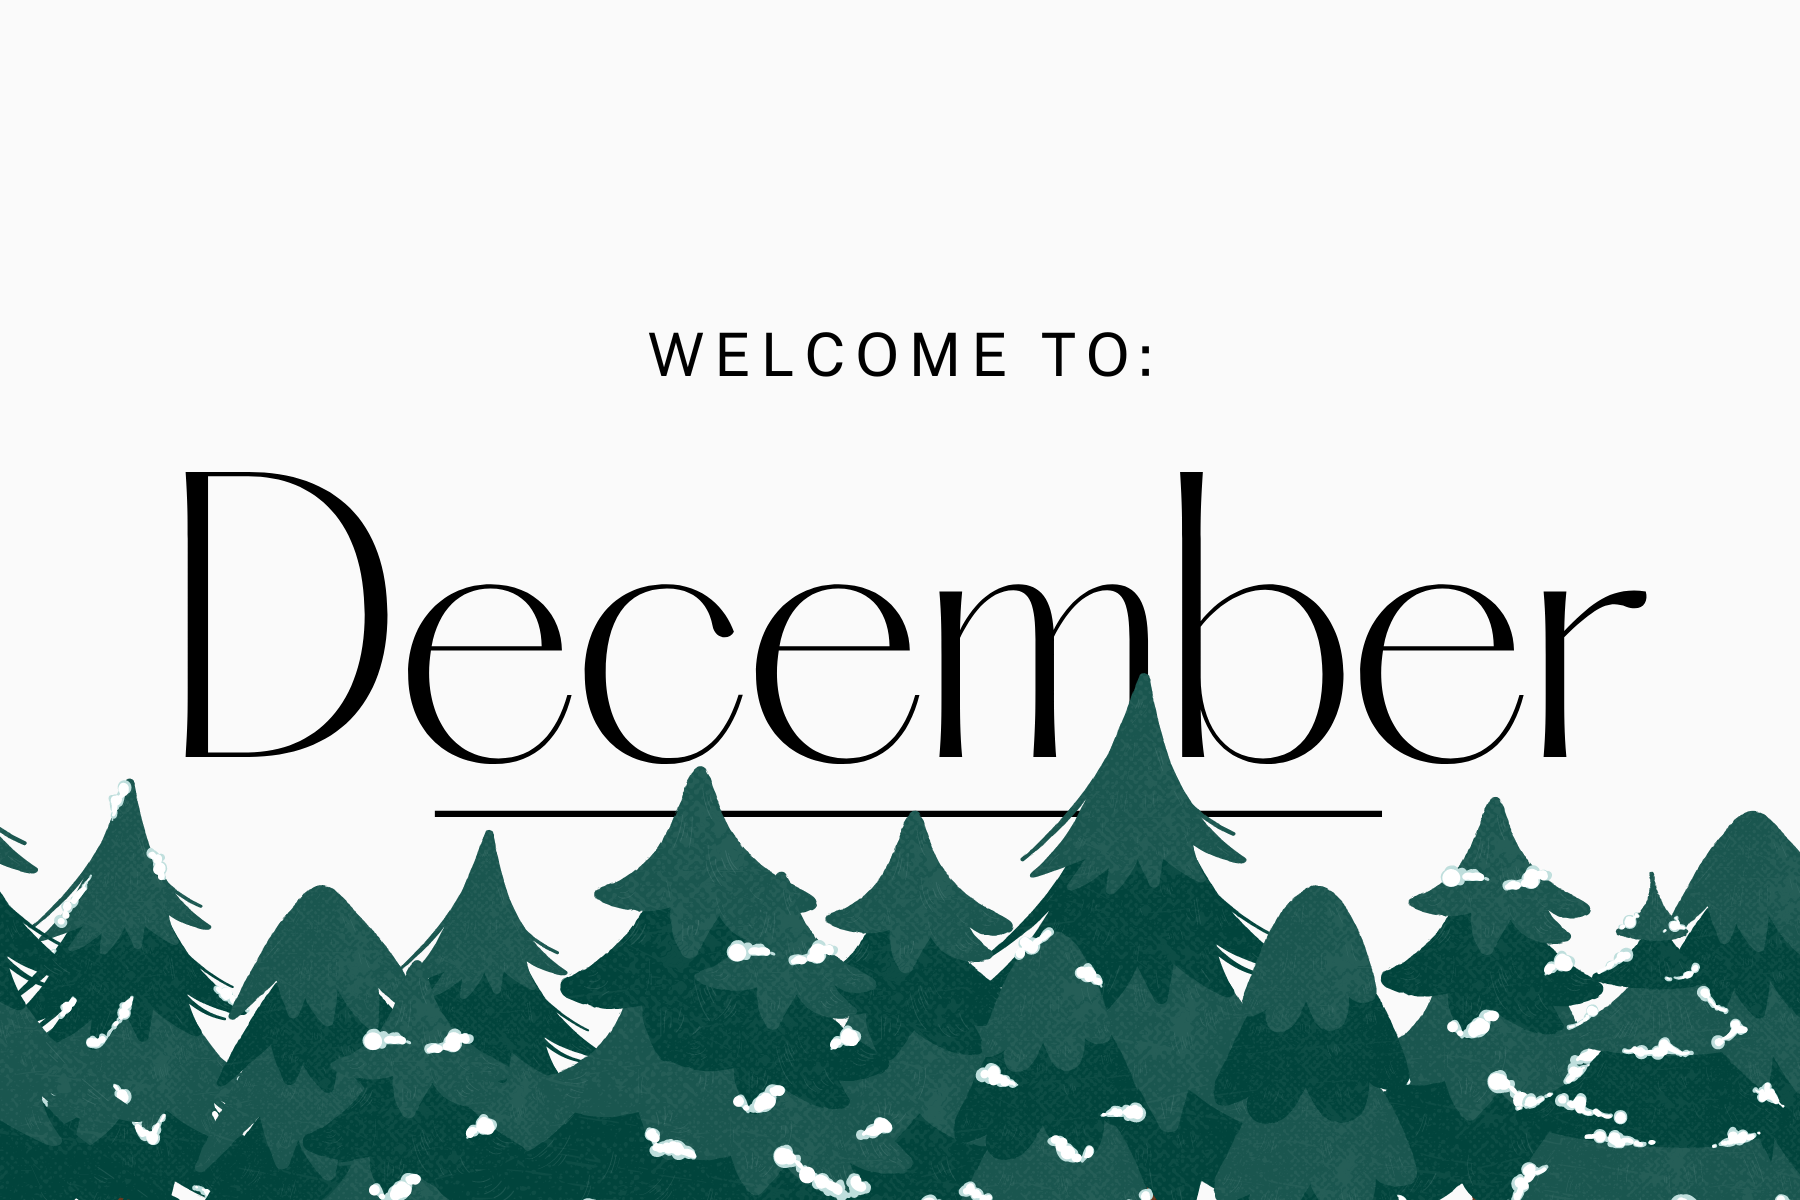 Welcome to December